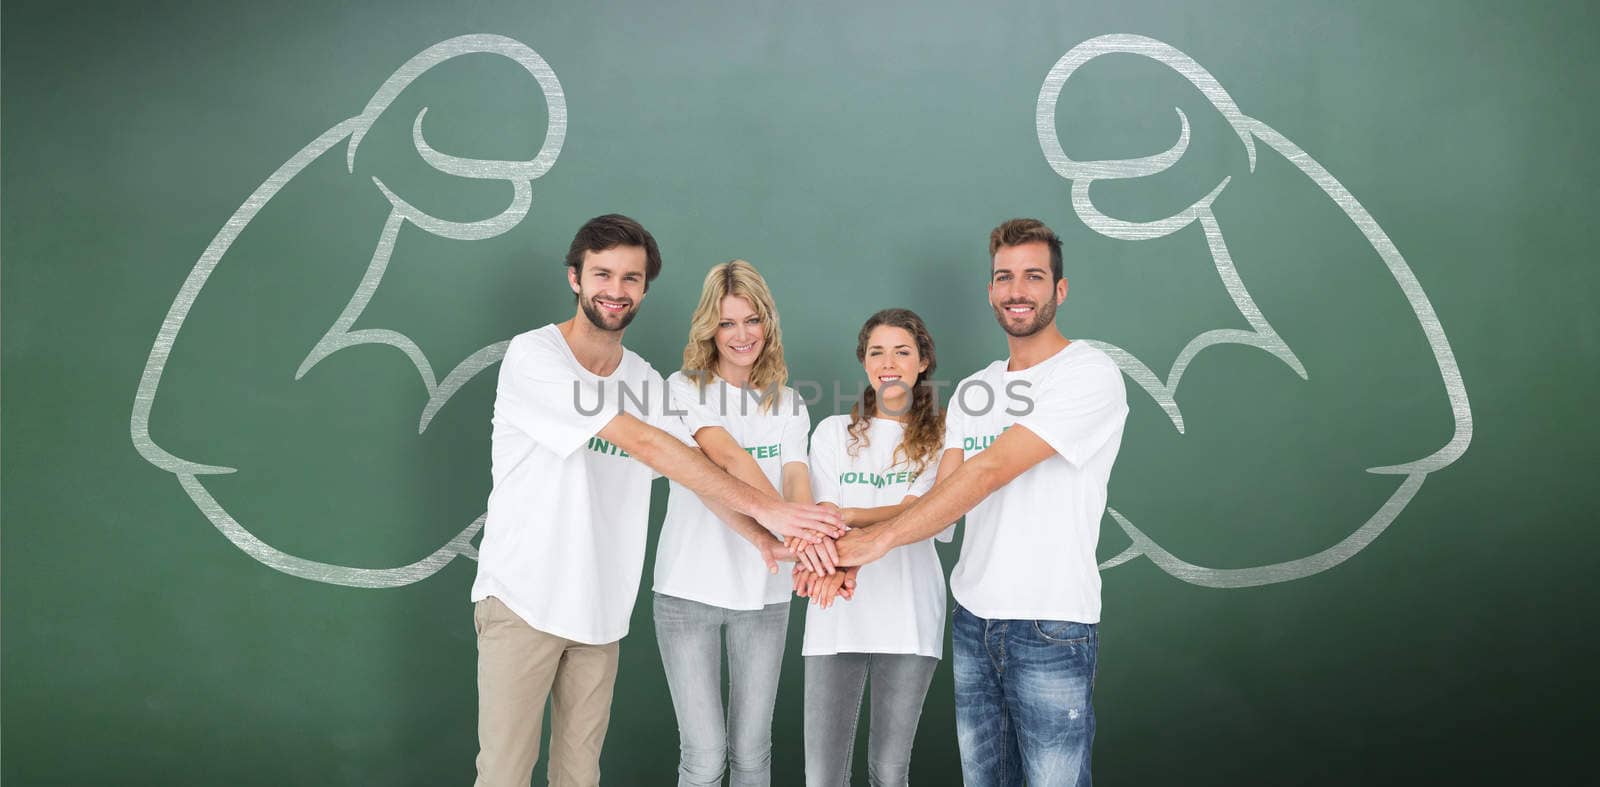 Group portrait of happy volunteers with hands together against green chalkboard